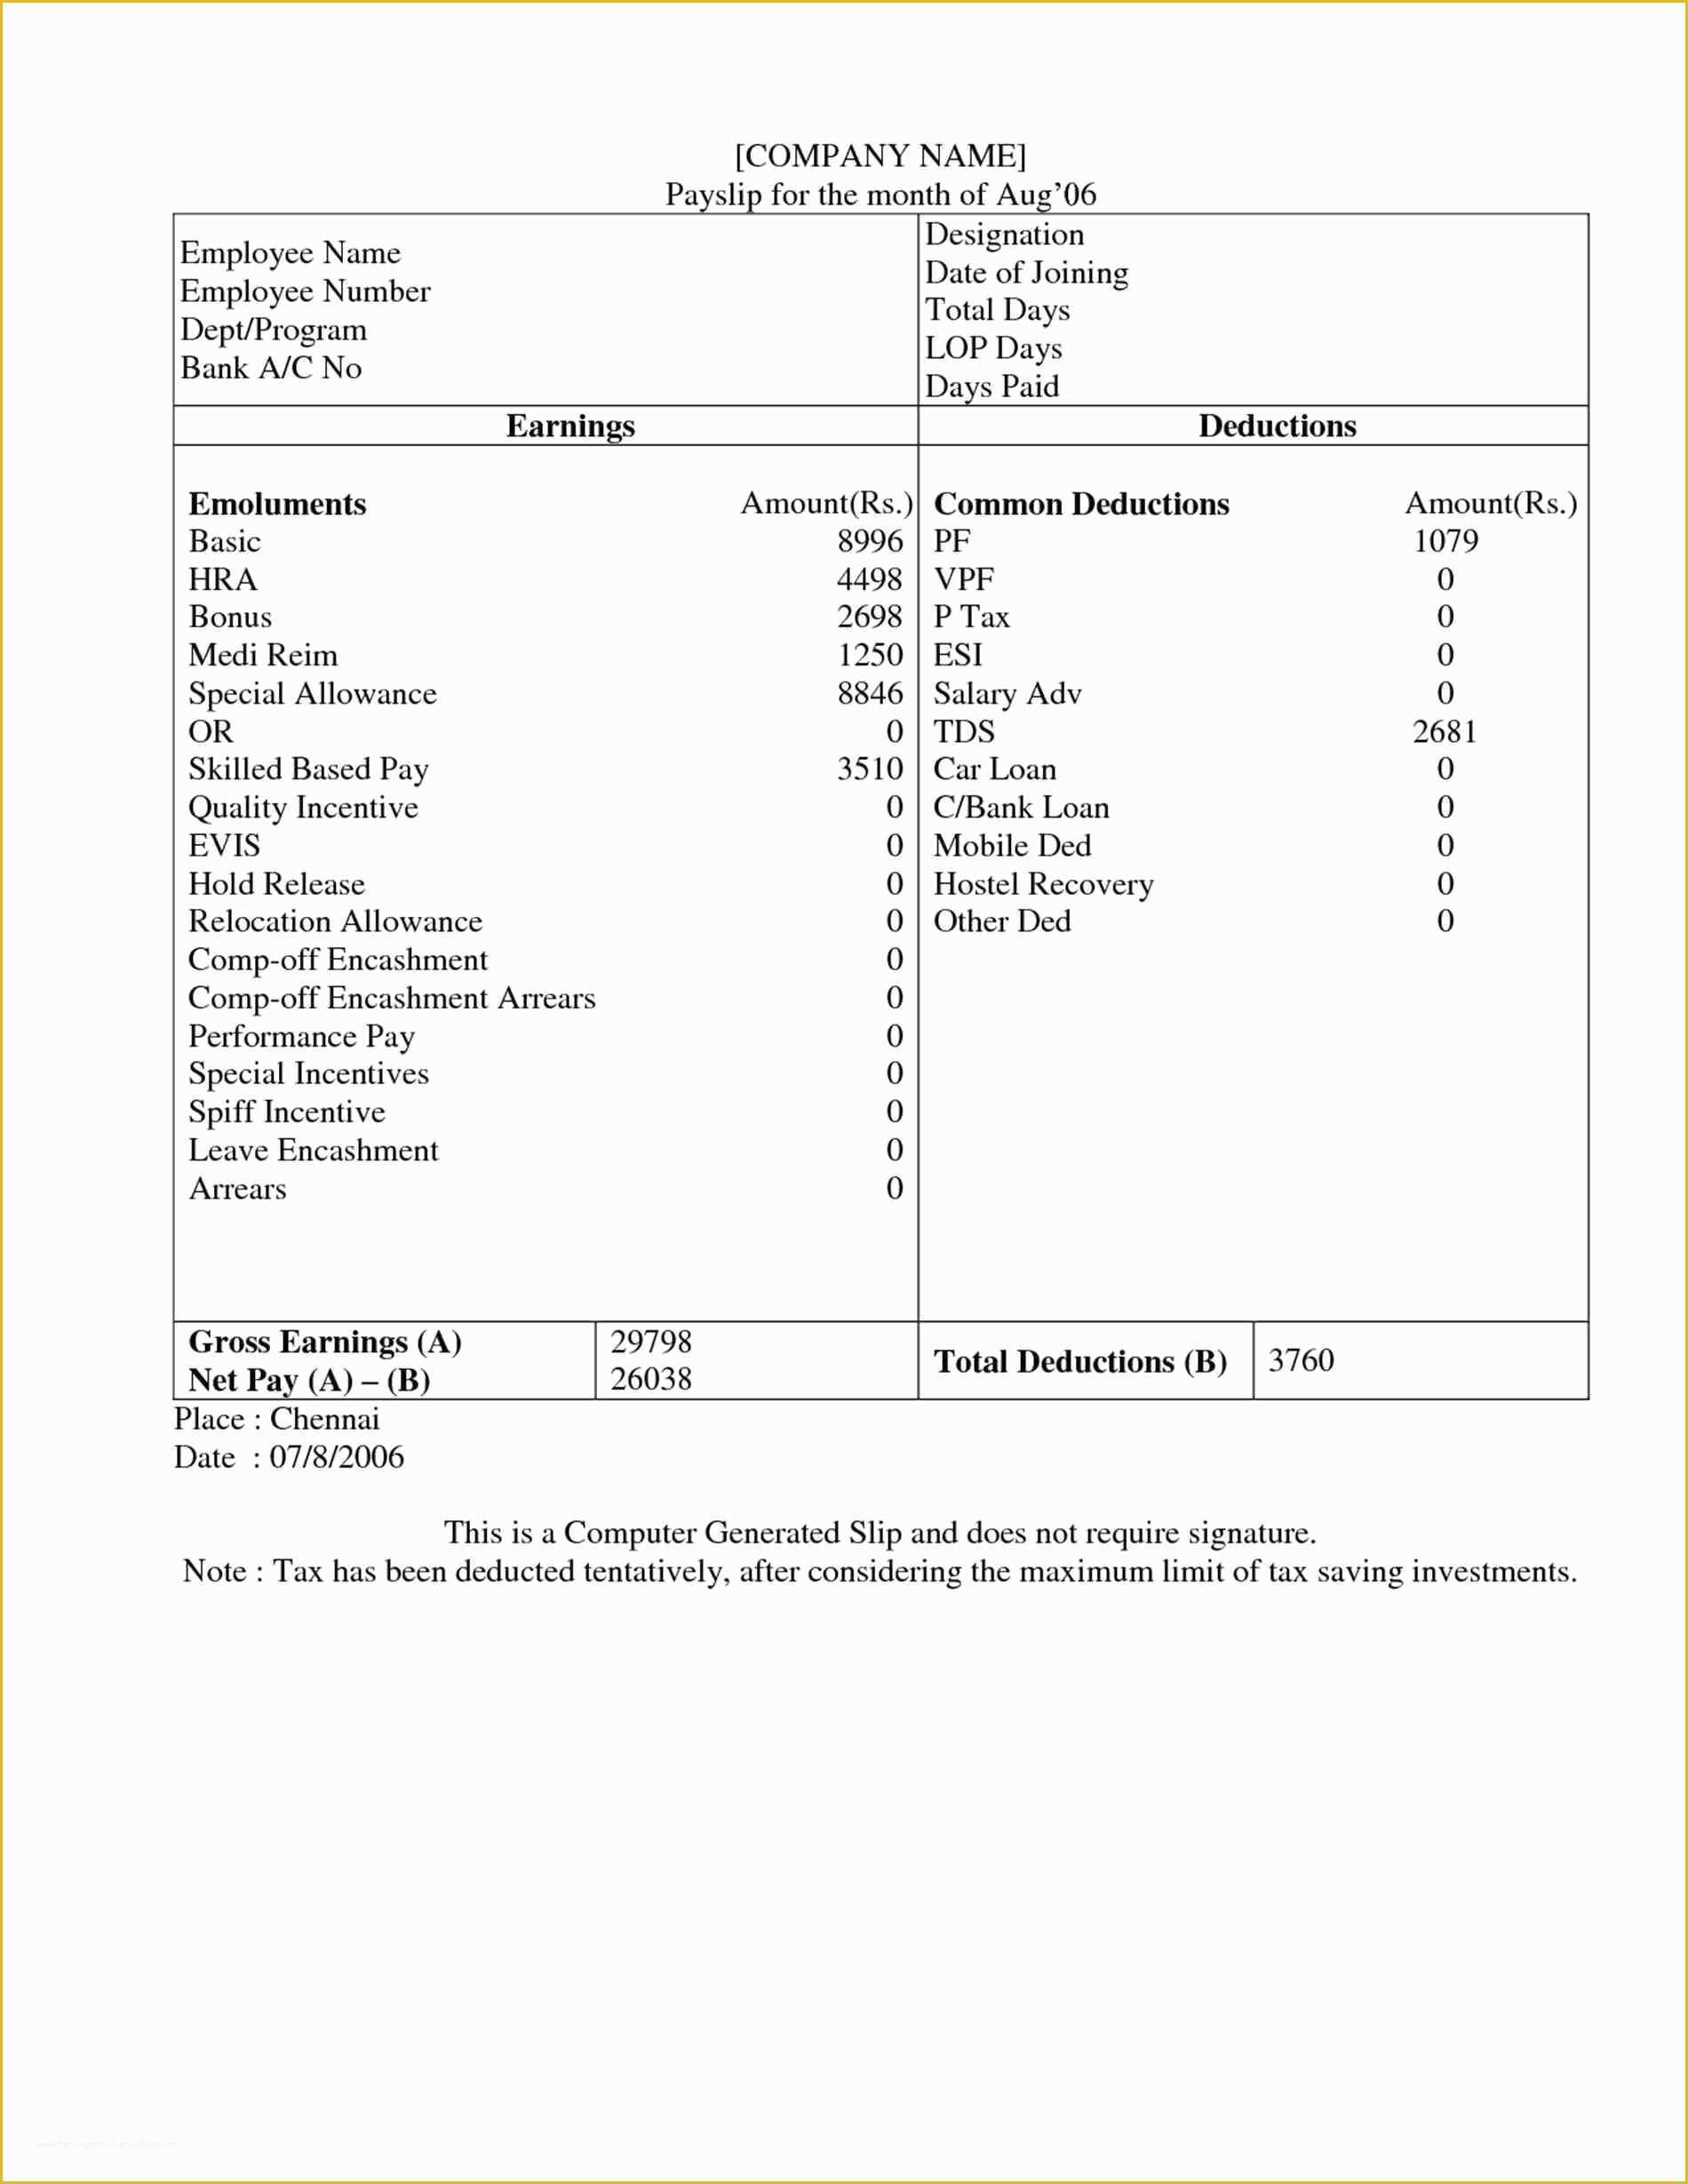 Free Earnings Statement Template Of Free Employee Earnings Statement Template